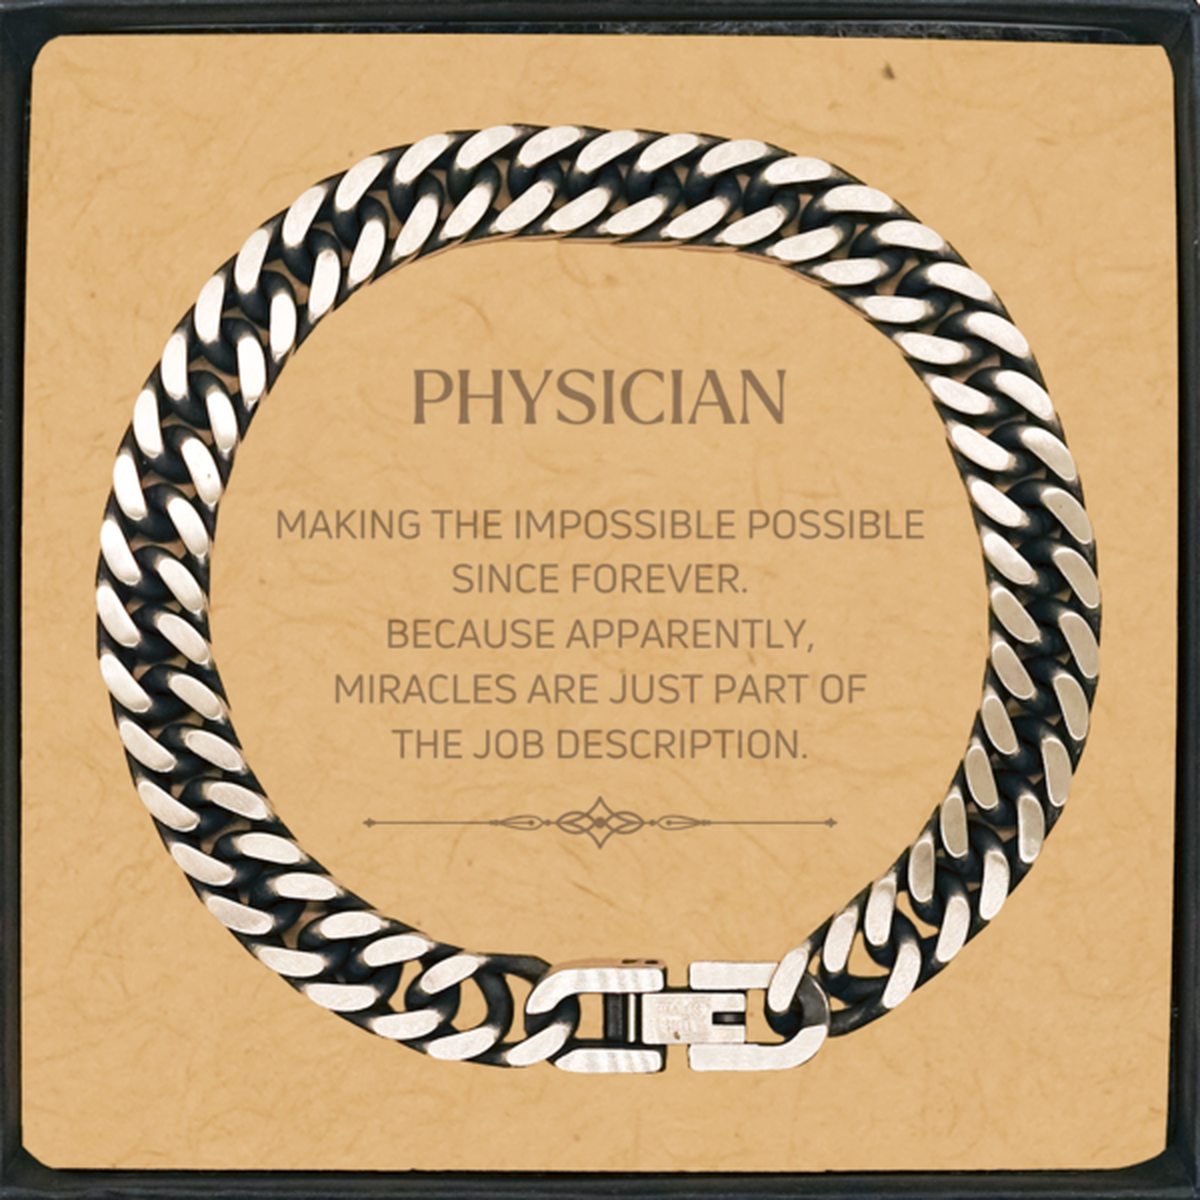 Funny Physician Gifts, Miracles are just part of the job description, Inspirational Birthday Cuban Link Chain Bracelet For Physician, Men, Women, Coworkers, Friends, Boss